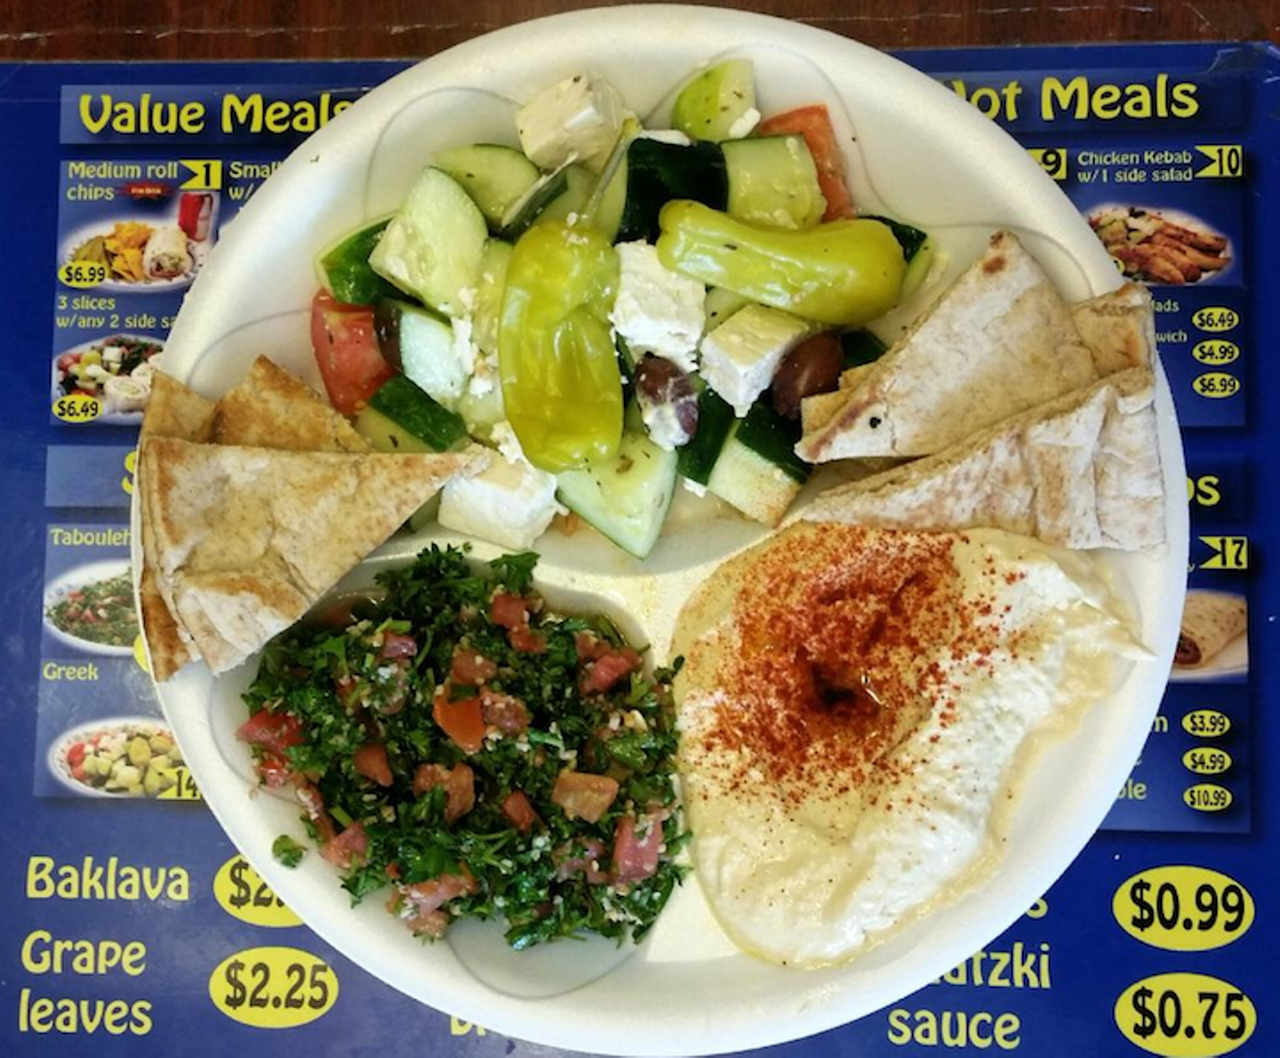 Mediterranean Deli
981 W. Fairbanks Ave., (407) 539-2650
This deli is known for the gyros, hummus and serving large portions of food so customers definitely get their money&#146;s worth. Although a somewhat obvious choice, try the Greek salad and gyro. 
Photo via Mike P./TripAdvisor